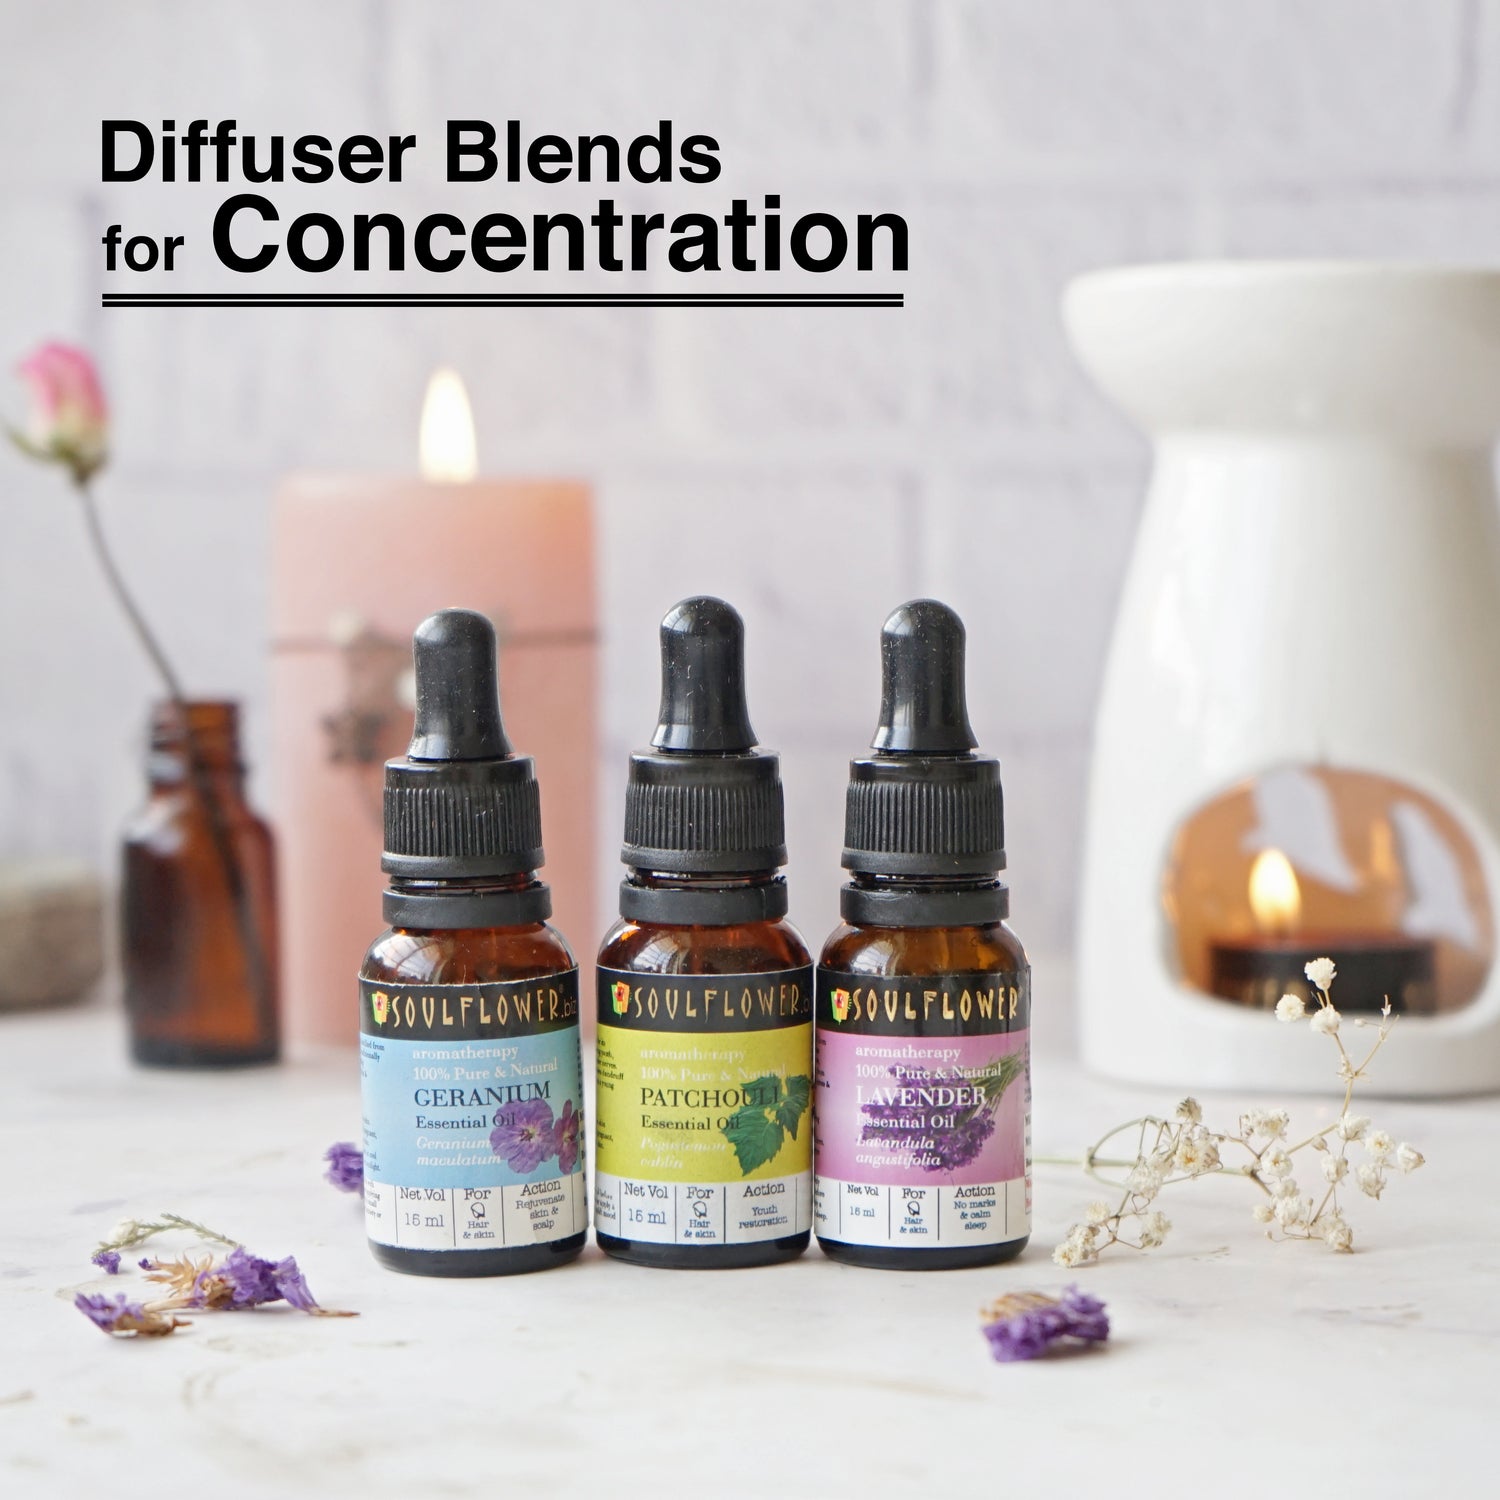 Diffuser Blends for Concentration